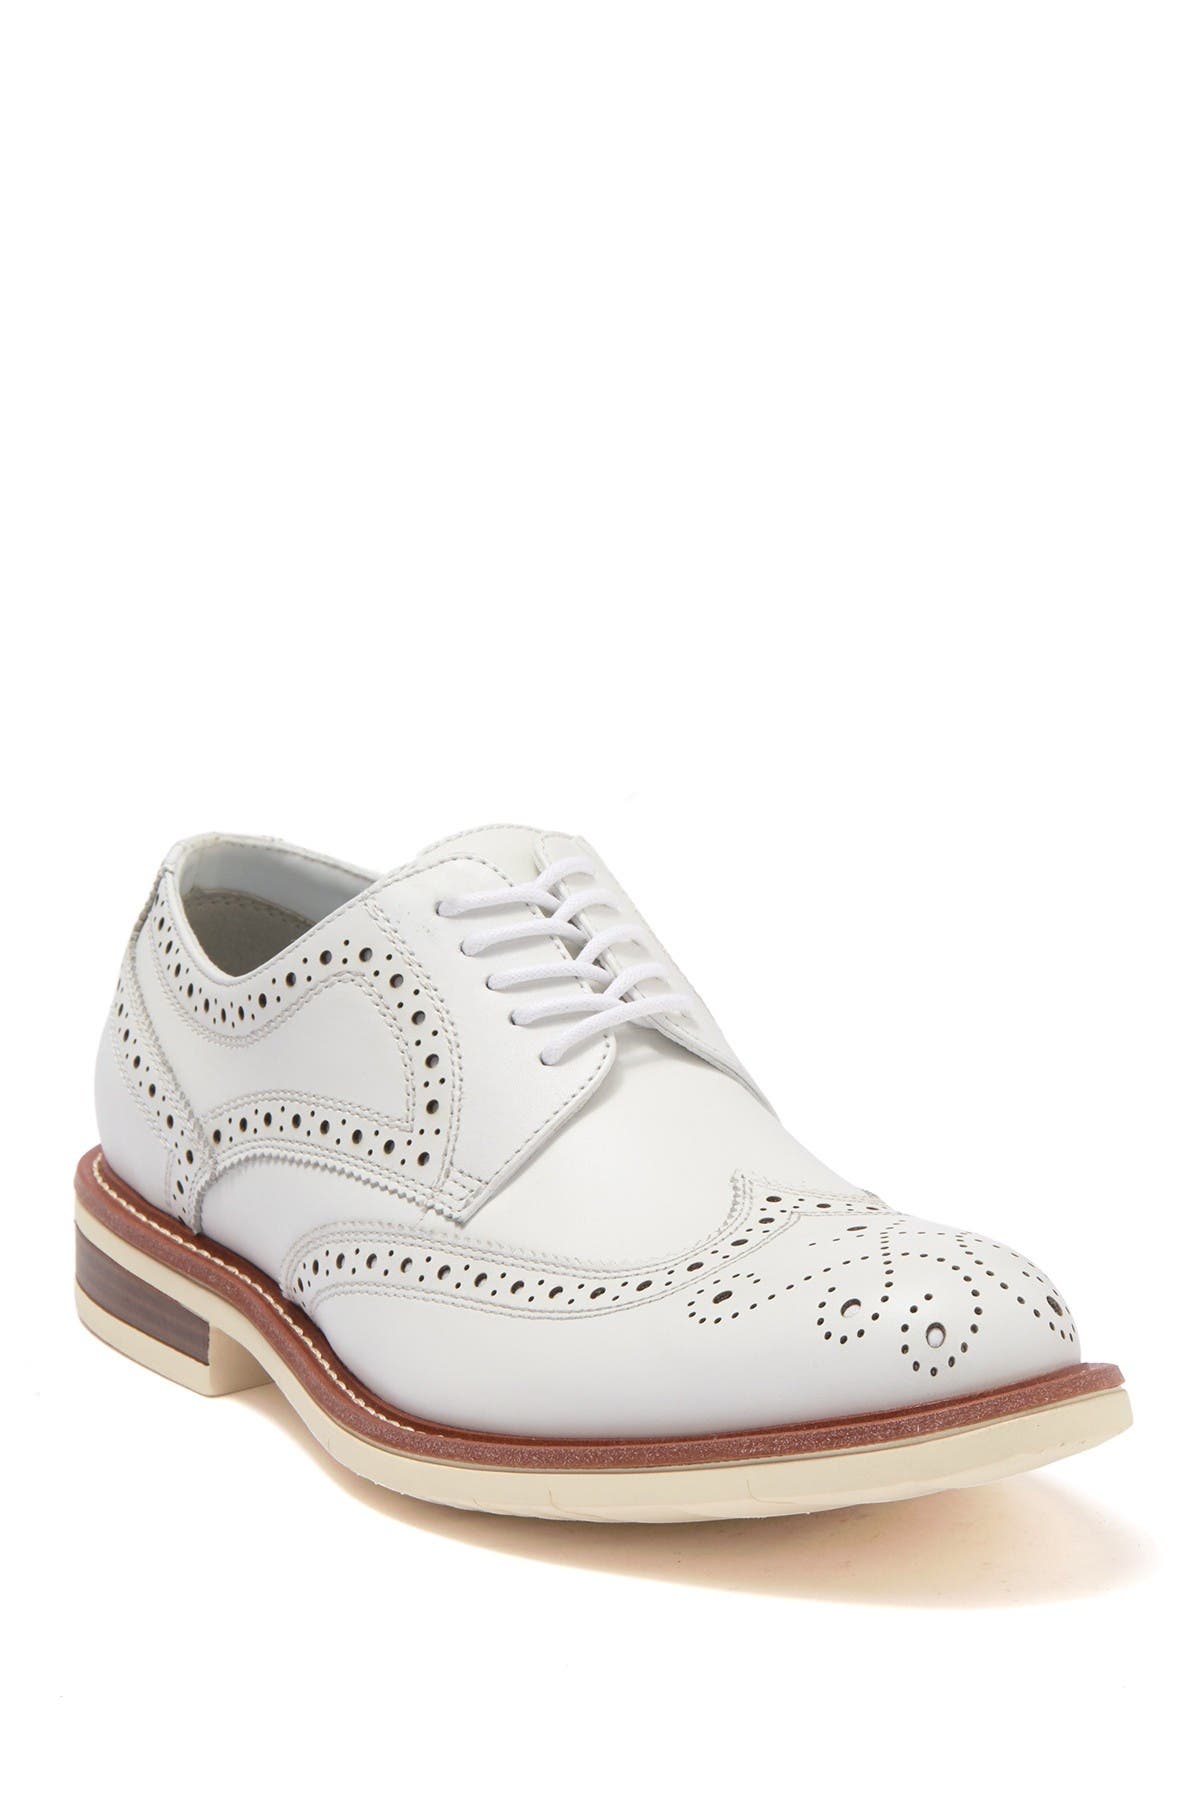 Kenneth Cole Reaction Klay Flex Wingtip Oxford In Off White